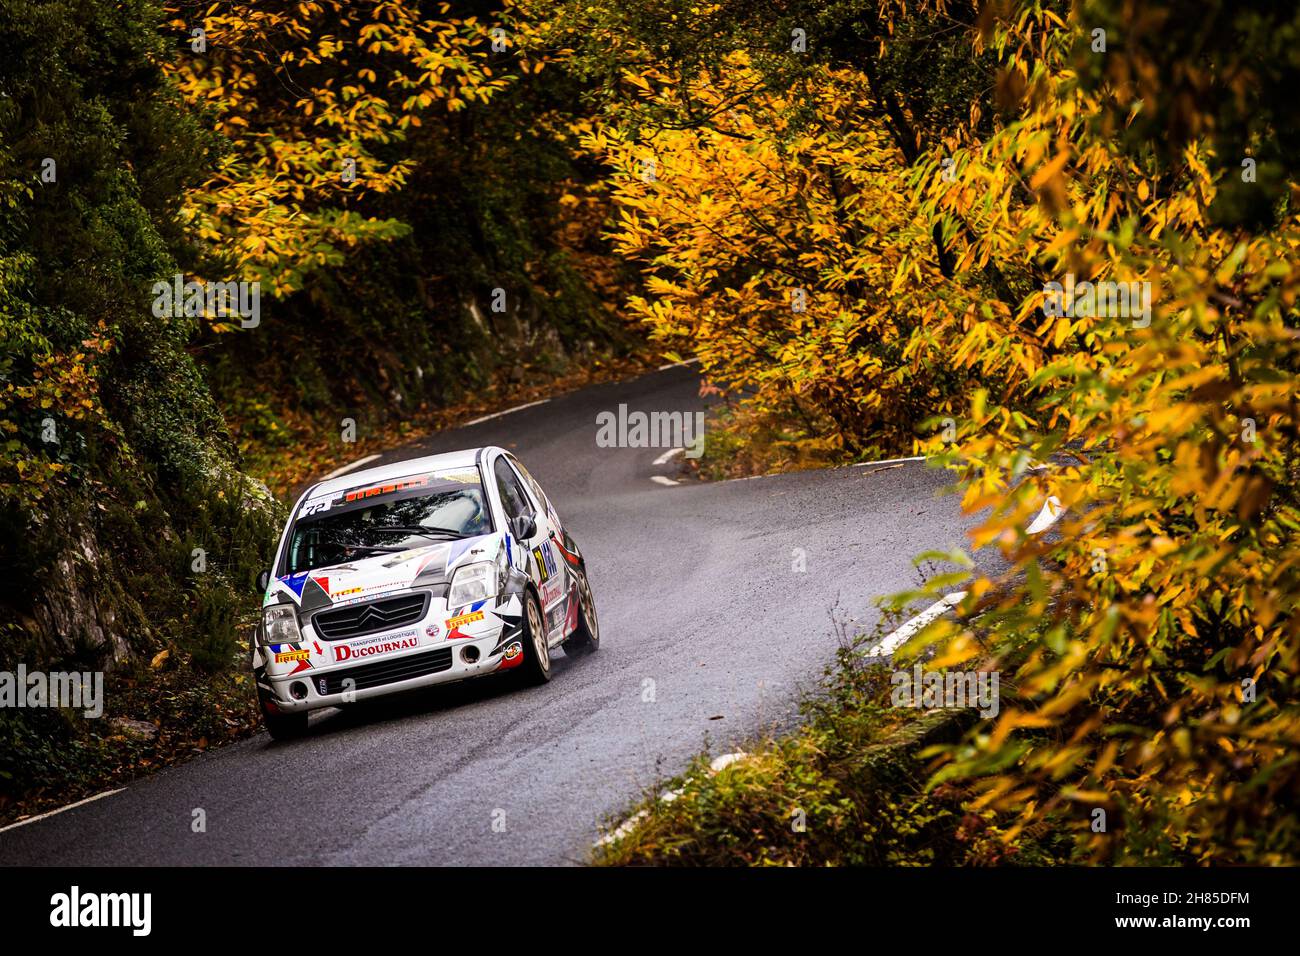 72 CORBERAND Yoan, MOUGENOT Hanghy, Citroen C2, action during the Rallye du Var 2021, 8th round of the Championnat de France des Rallyes 2021, from November 25 to 28 in Sainte-Maxime, France - Photo Bastien Roux / DPPI Stock Photo